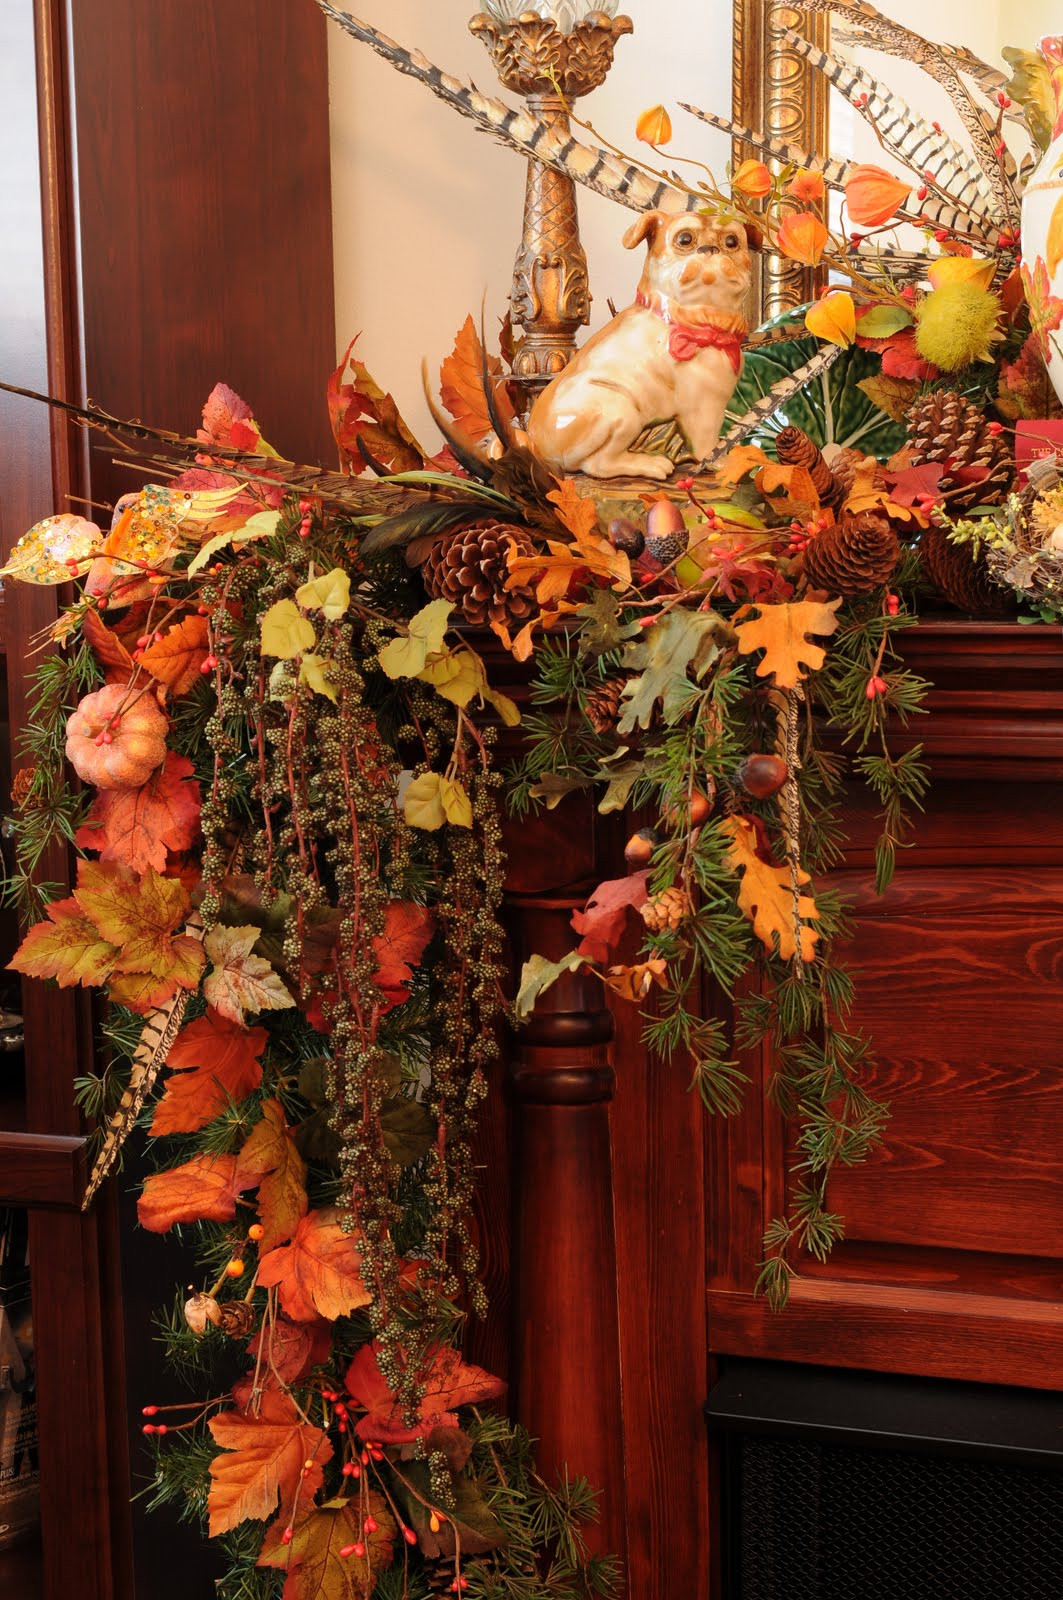 Fall Decorated Fireplace Mantels
 Sweet Designs Fall Fireplace Mantel decorating